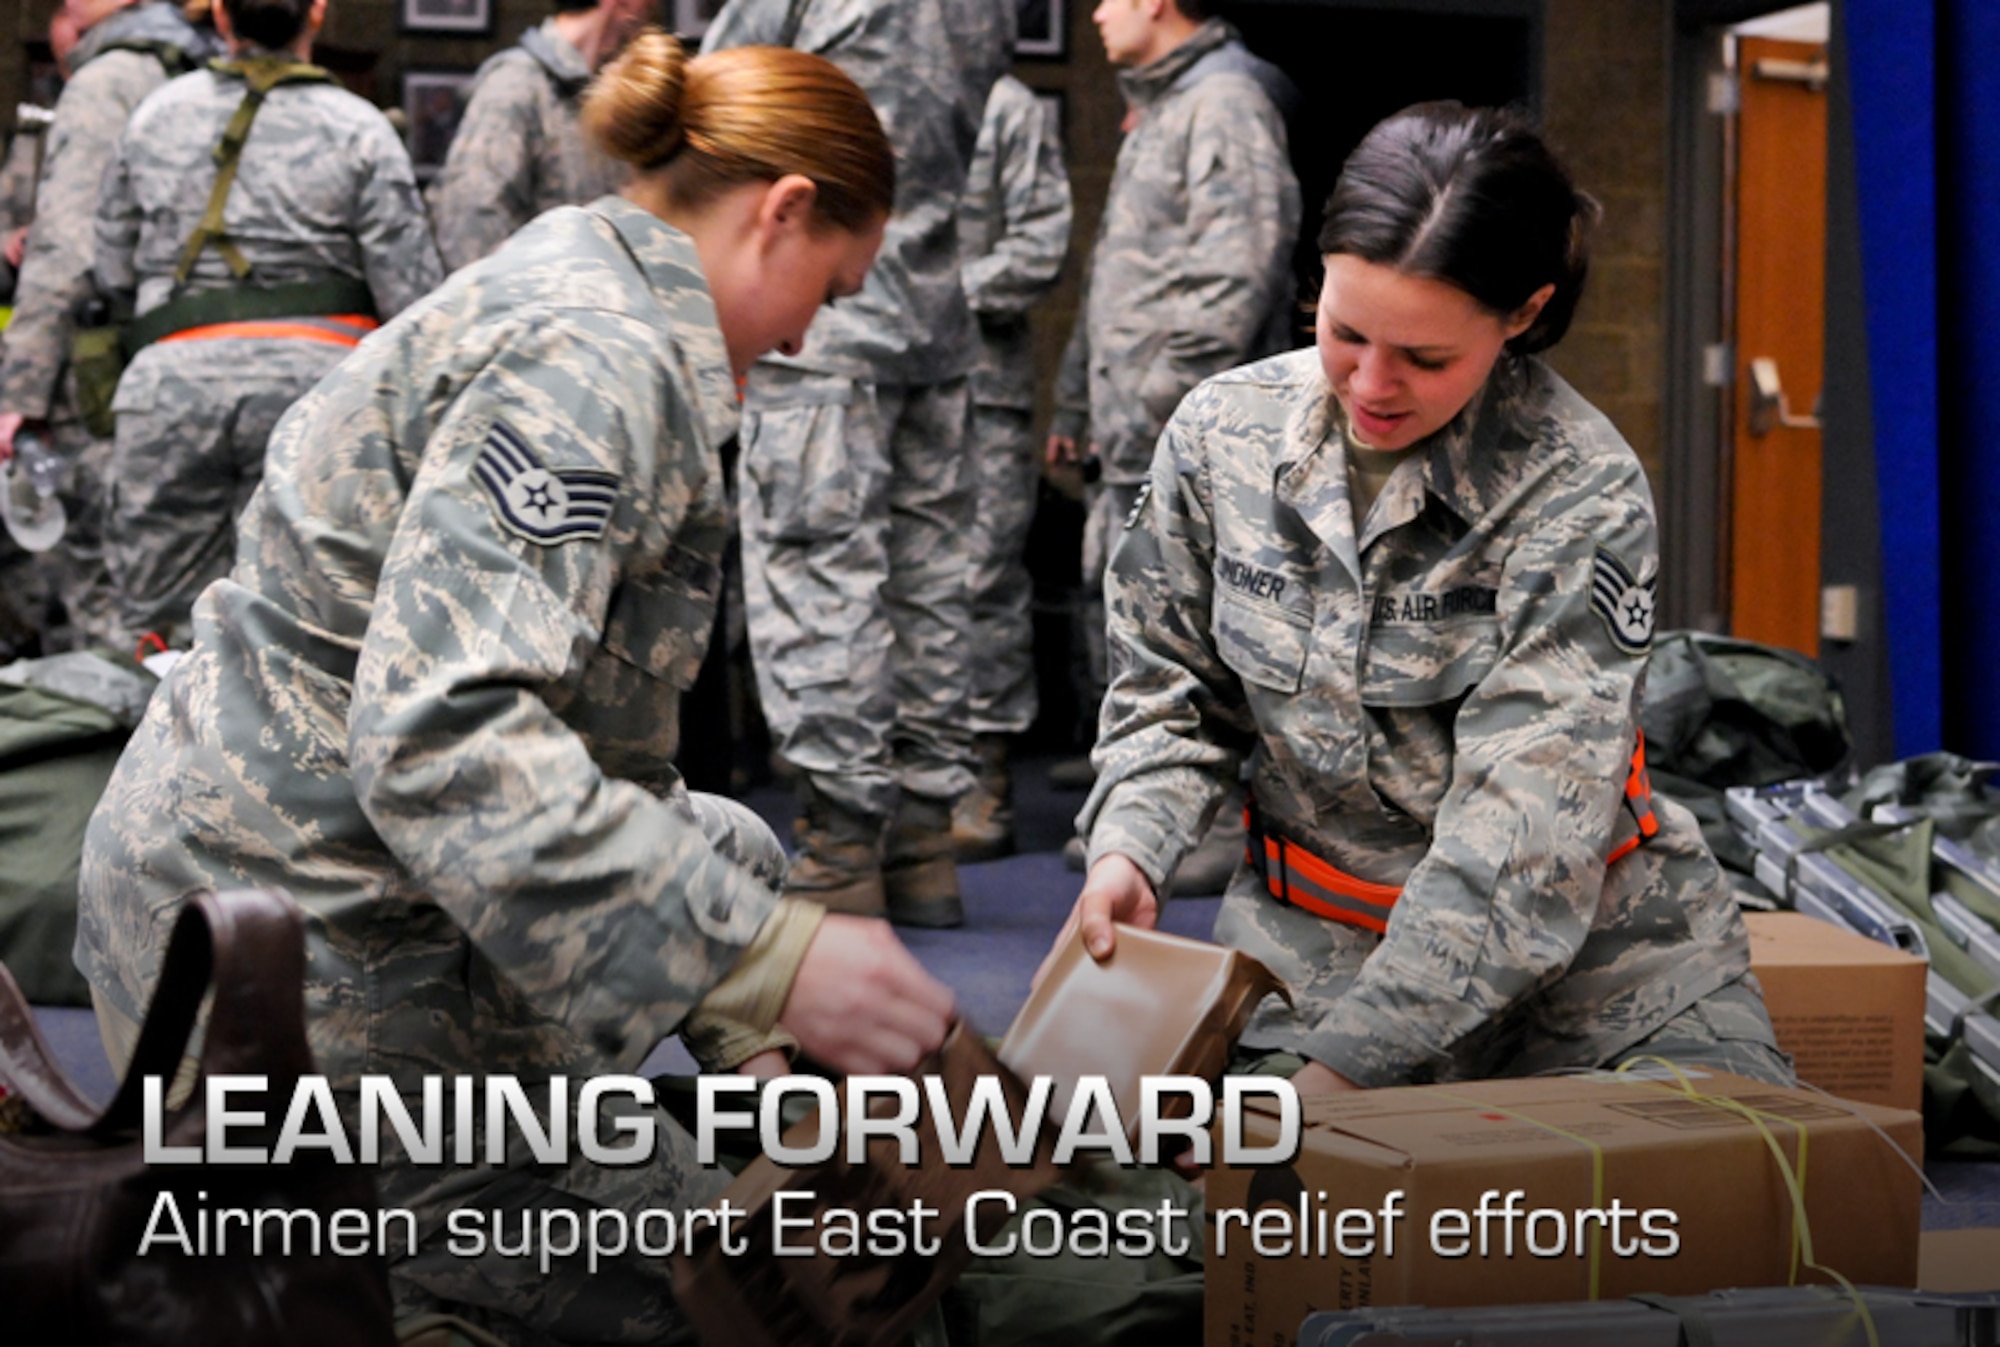 Air Force Staff Sgts. Jennifer Lindner and Amanda Surwillo pack meals, ready to eat, as they and fellow Airmen prepare for deployment as part of New York's response to Hurricane Sandy on Stewart Air National Guard Base in Newburgh, N.Y., Oct. 31, 2012. The Airmen are assigned to the 105th Airlift Wing and 213th Engineering Installation Squadron. (U.S. Air Force photo/Tech. Sgt. Michael O'Halloran)

